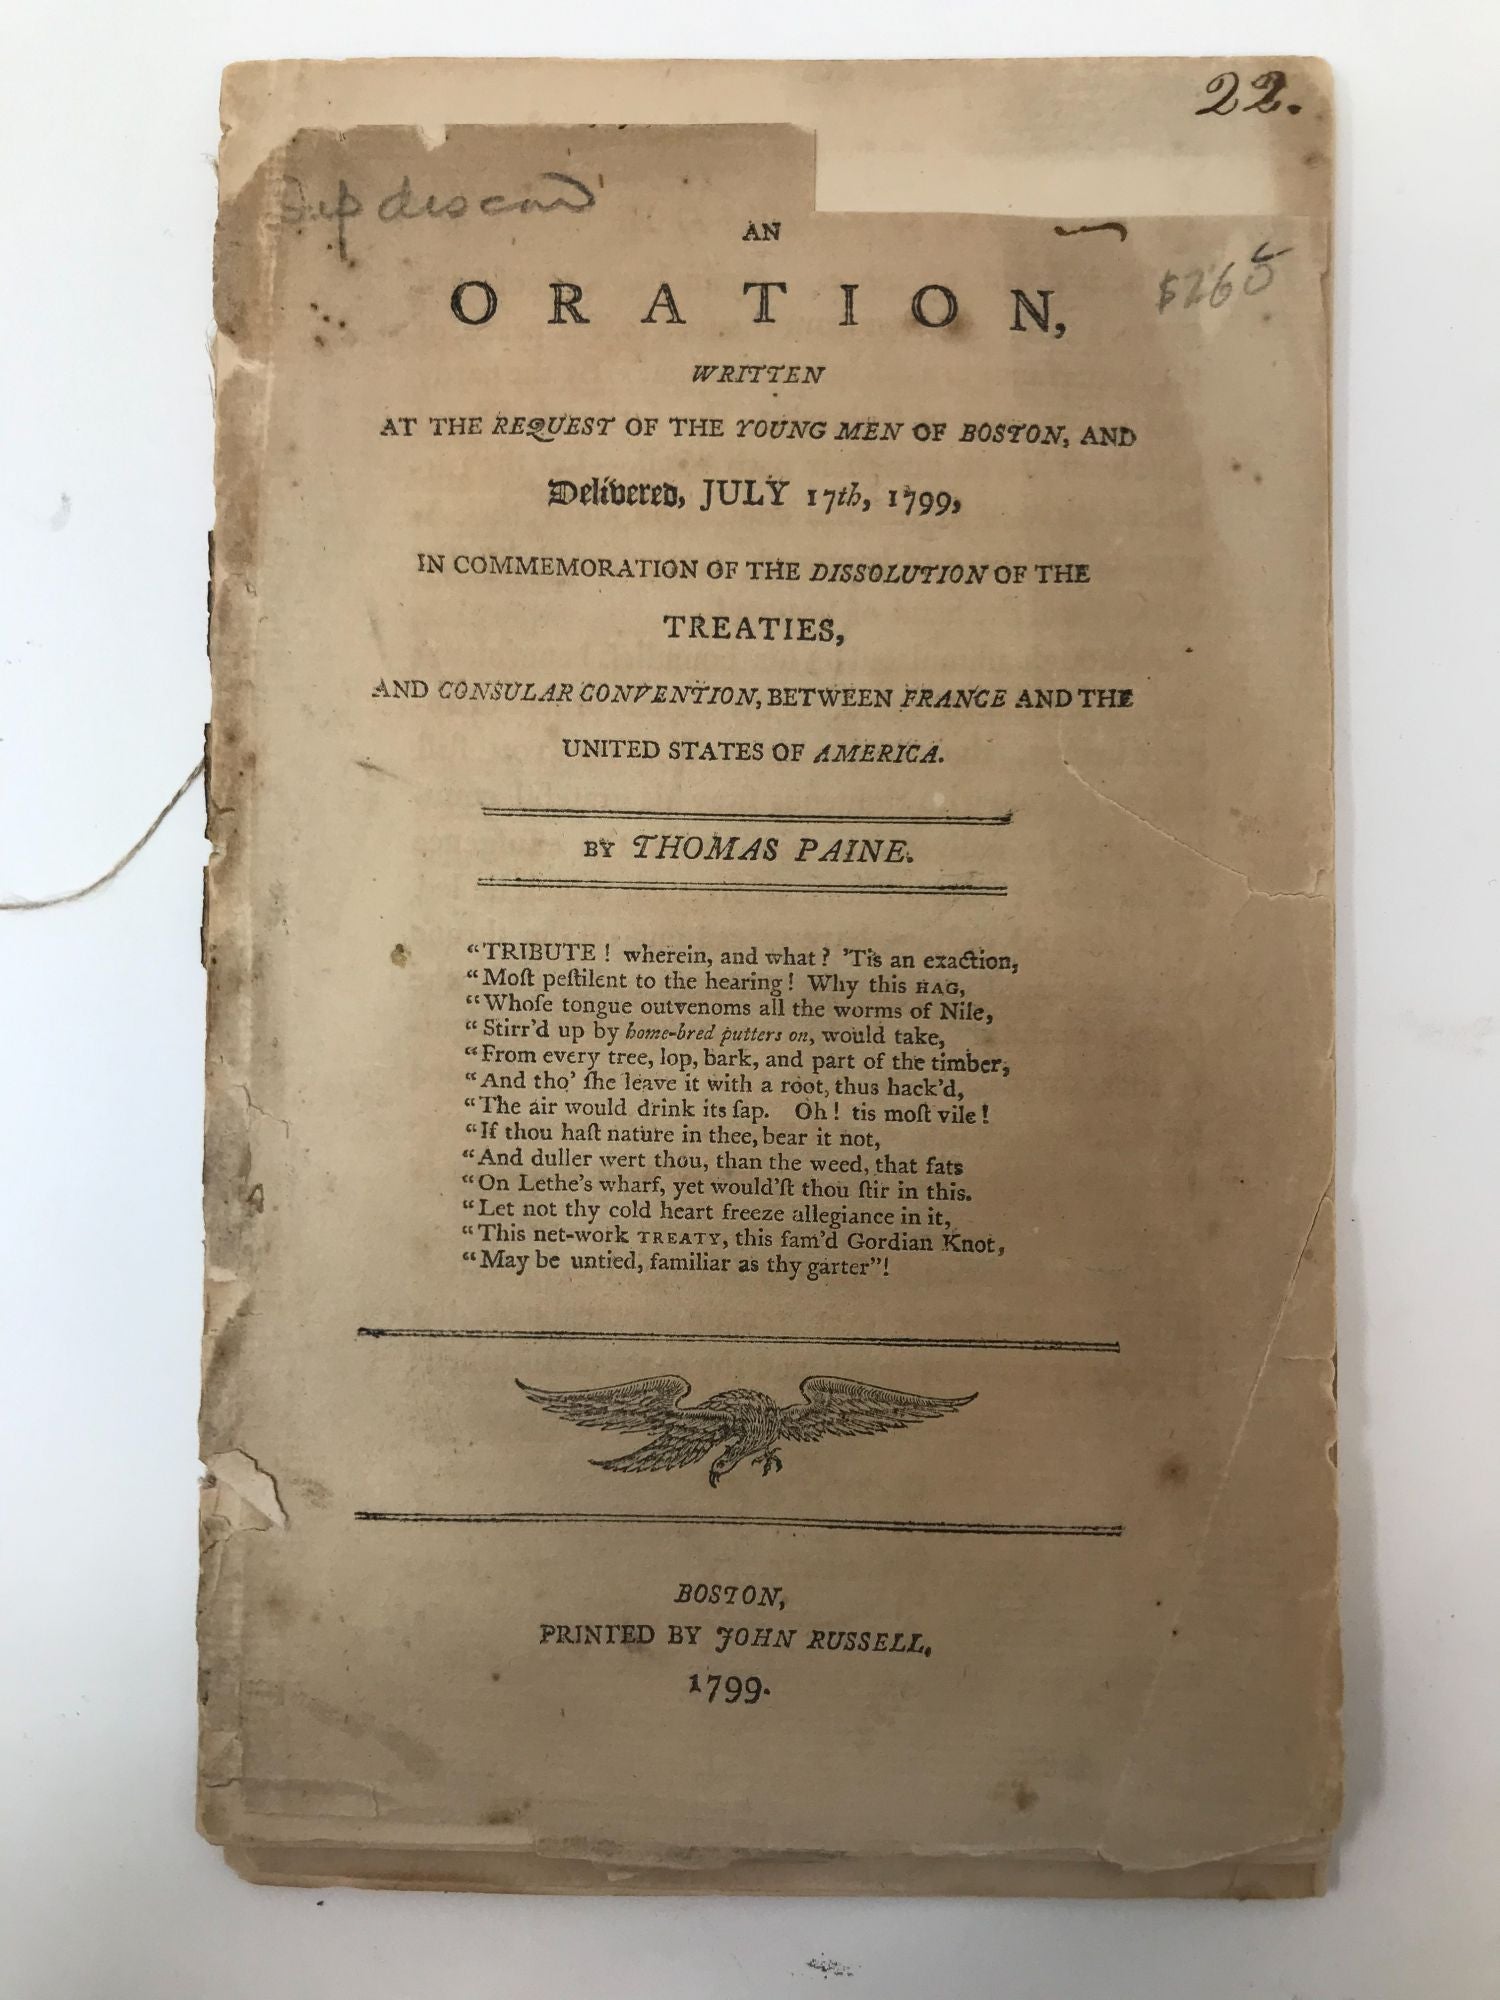 Treat, Robert, Jr. - An Oration, Written at the Request of the Young Men of Boston, and Delivered, July 17th, 1799 in Commemoration of the Dissolution of the Treaties, and Consular Convention, between France and the New United States of America. ; (Writing As Tom Paine, Not the Famous Tom Paine)